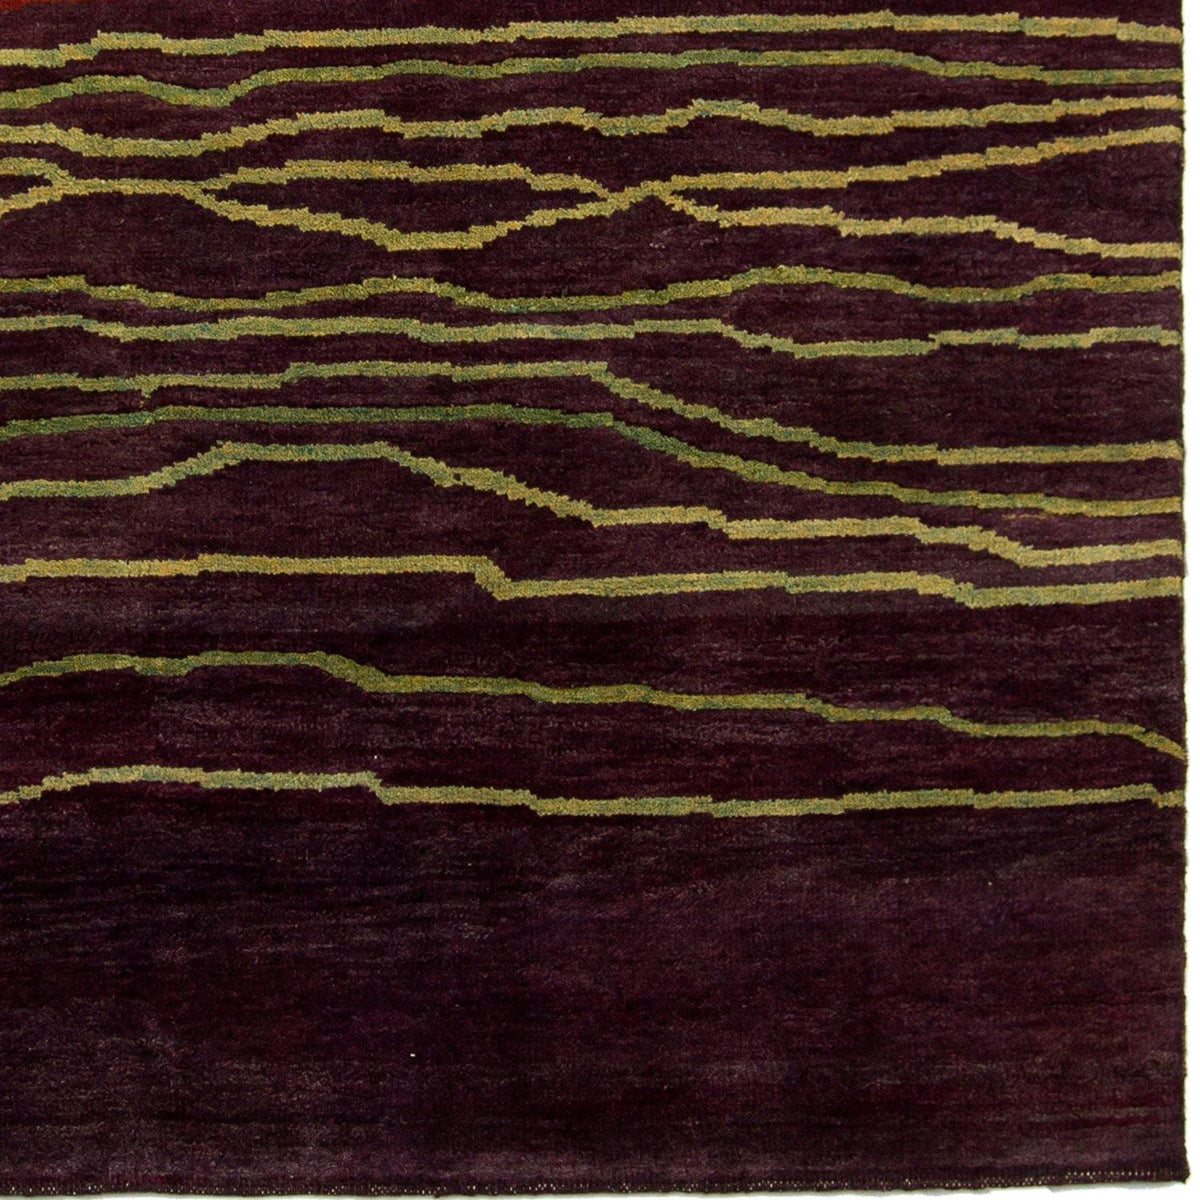 Contemporary Hand-knotted NZ Wool Rug 155cm x 217cm